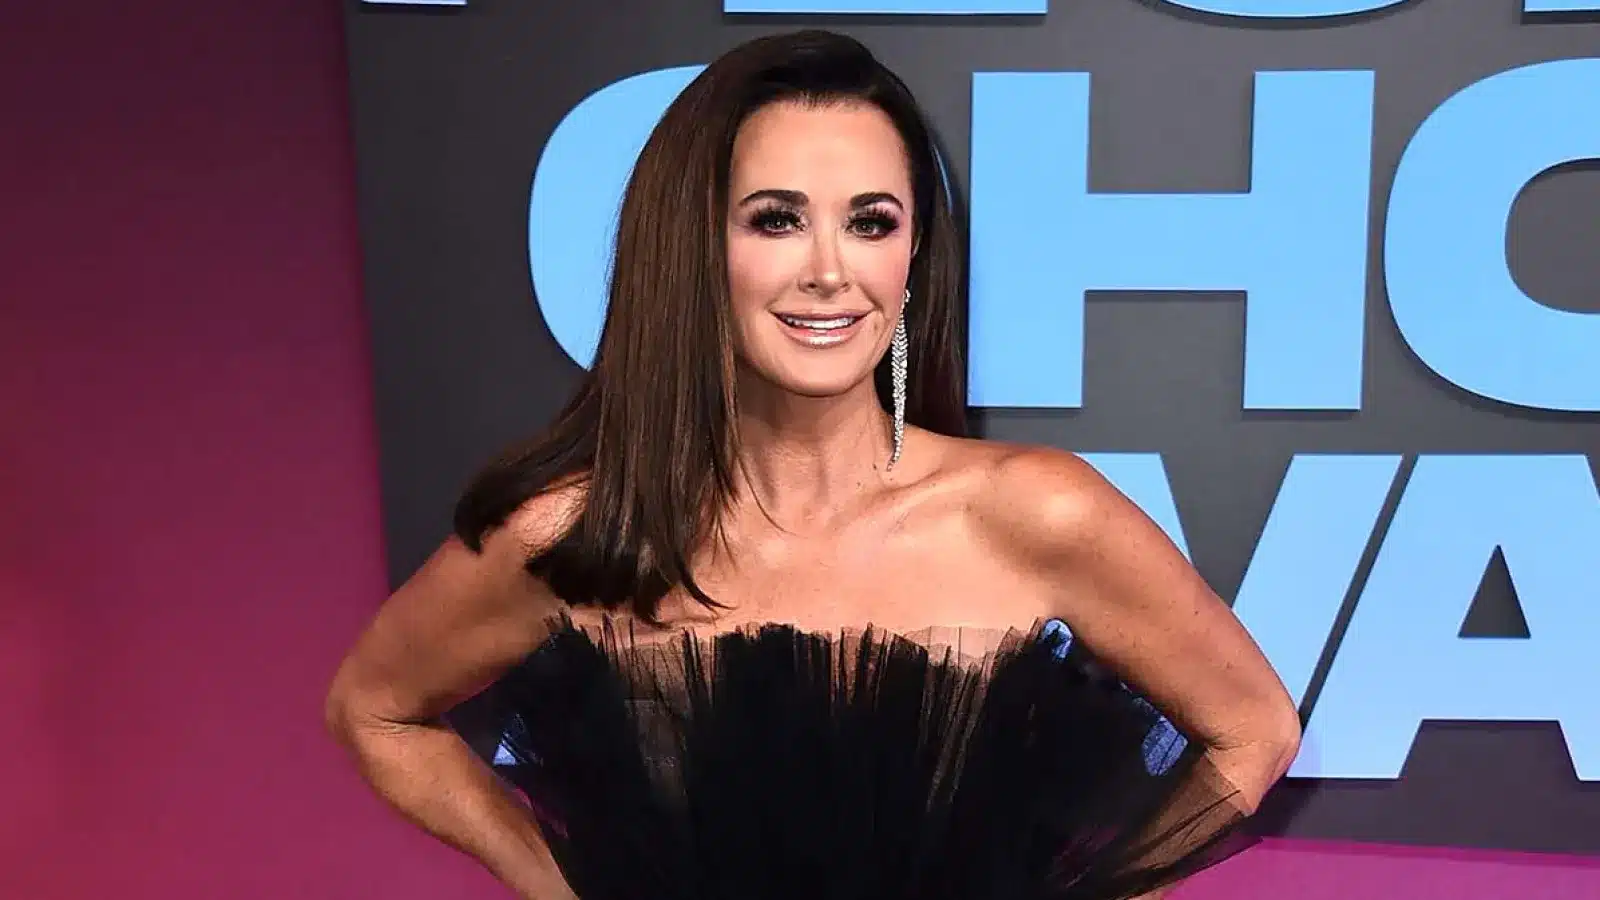 How Rich is the RHOBH Star - Kyle Richards Net Worth 2022?